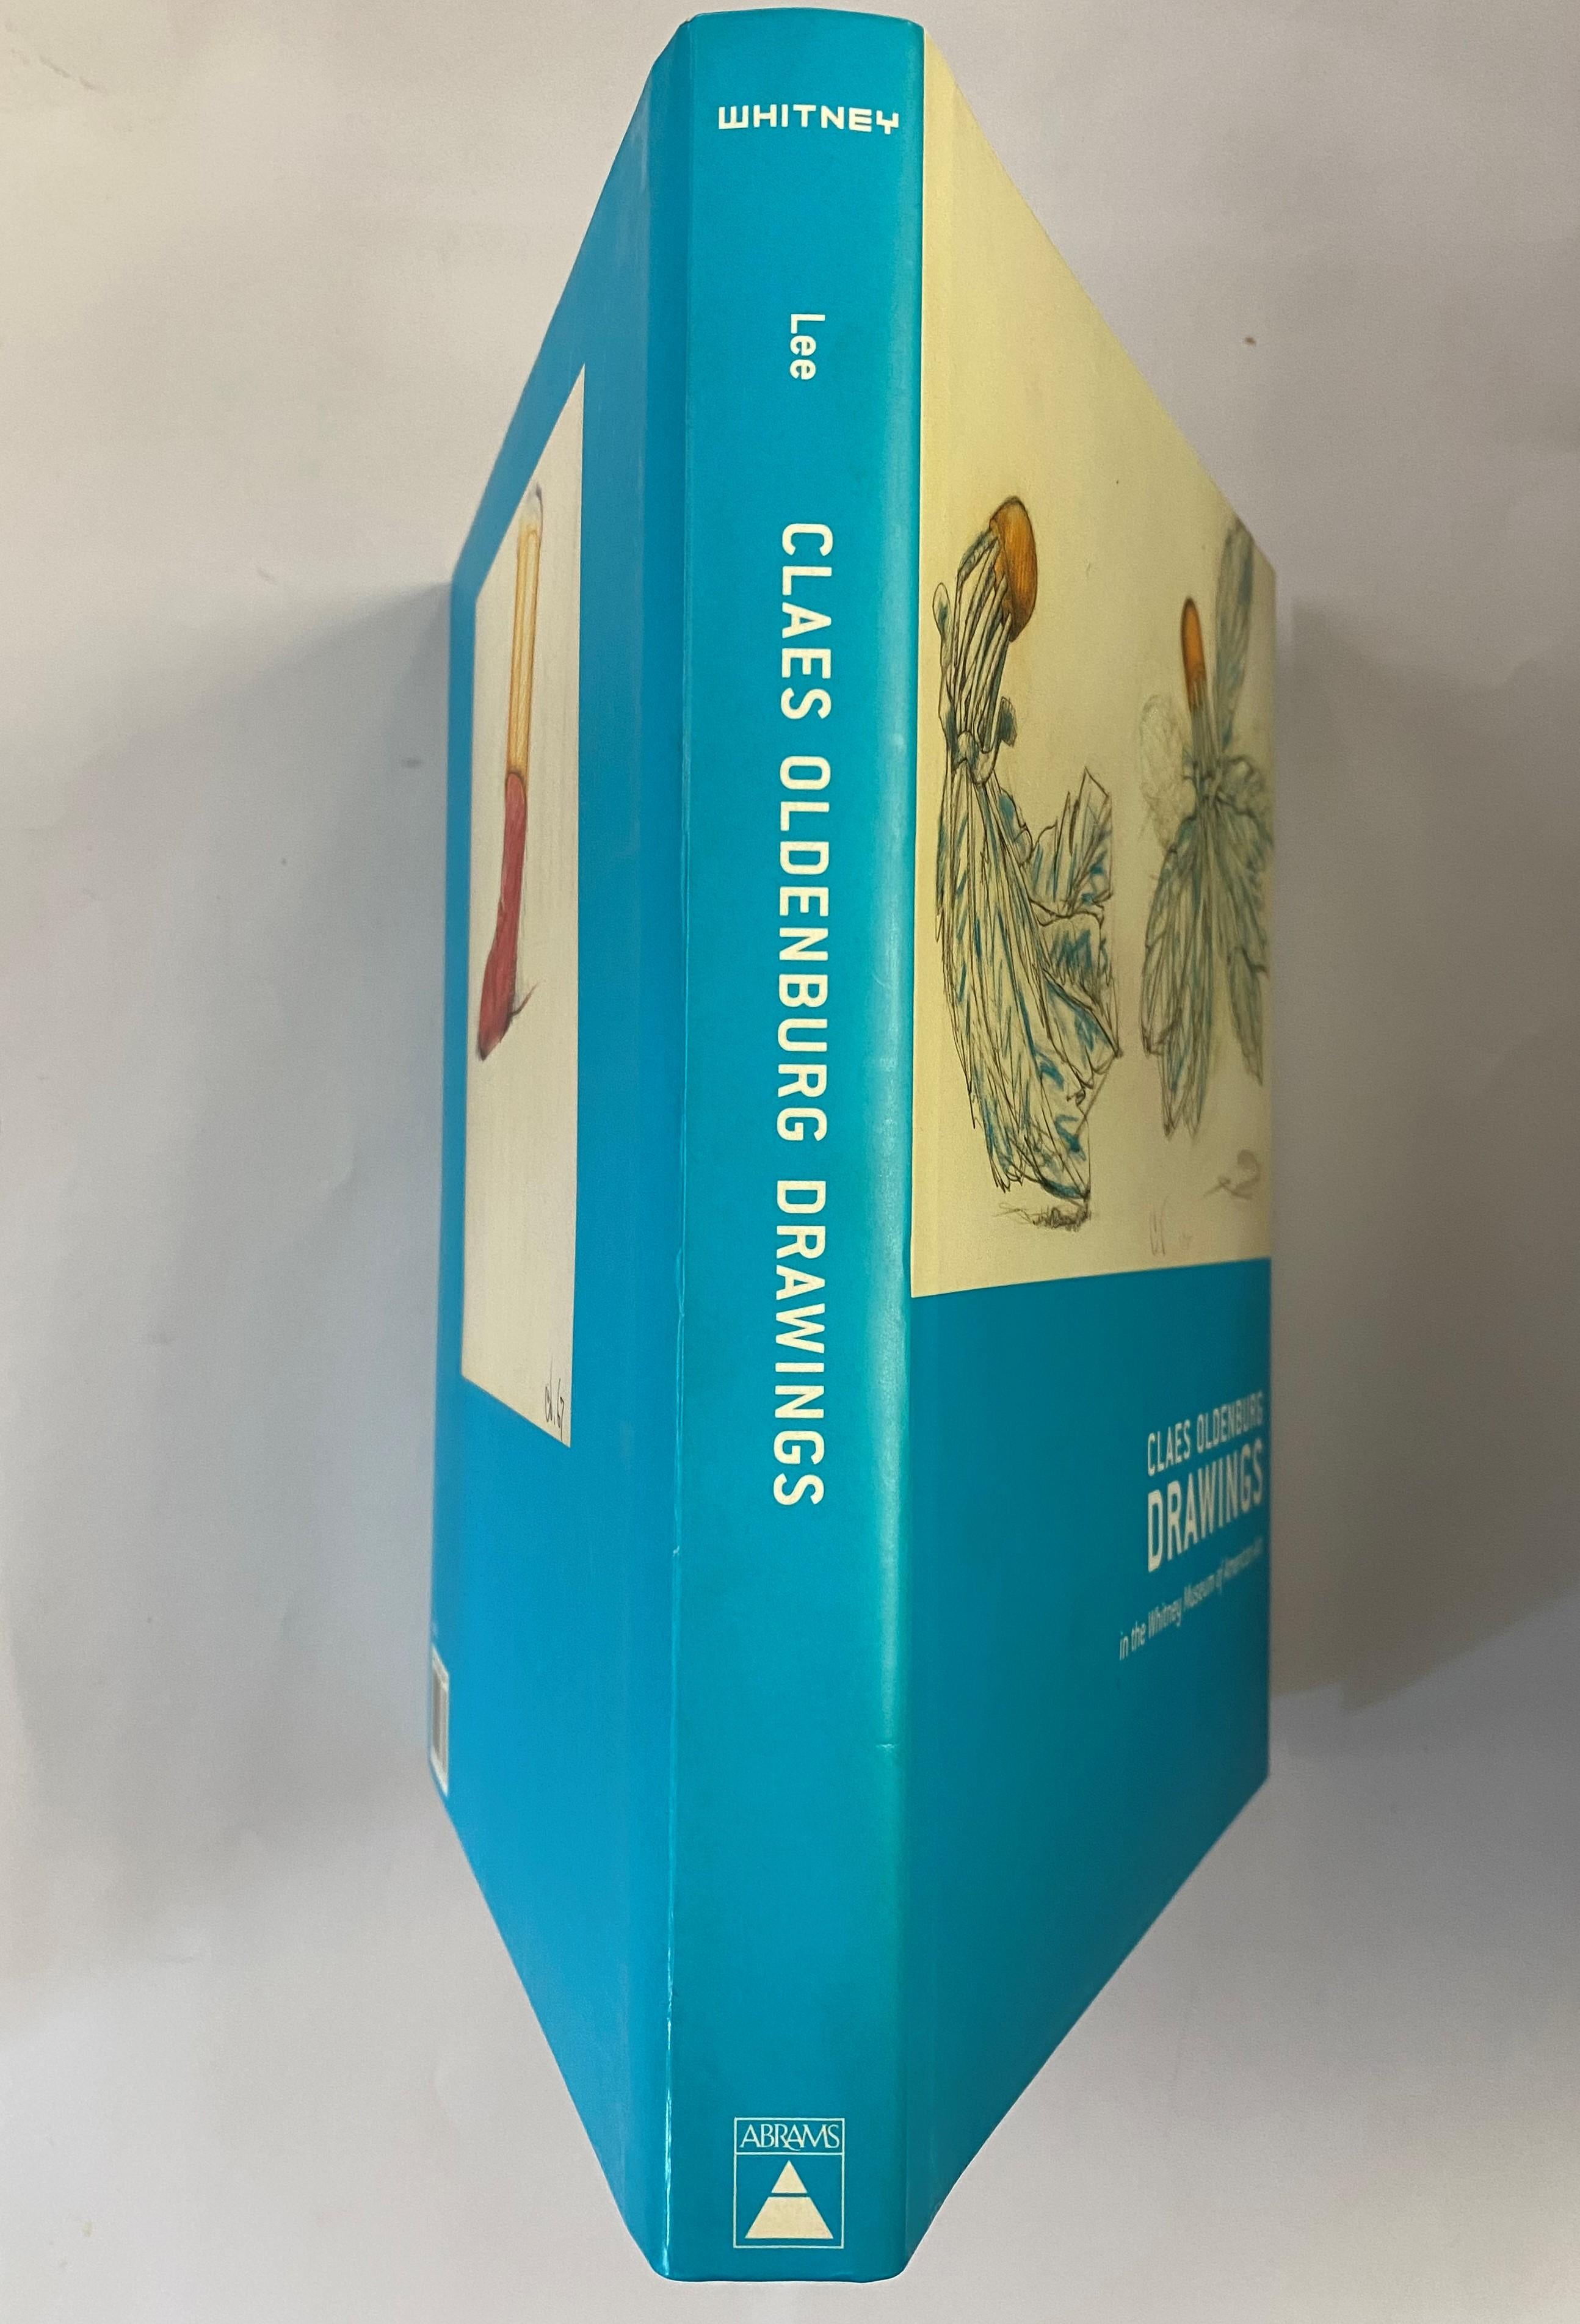 Claes Oldenburg Drawings in the Whirney Museum of American Art (Book) For Sale 11